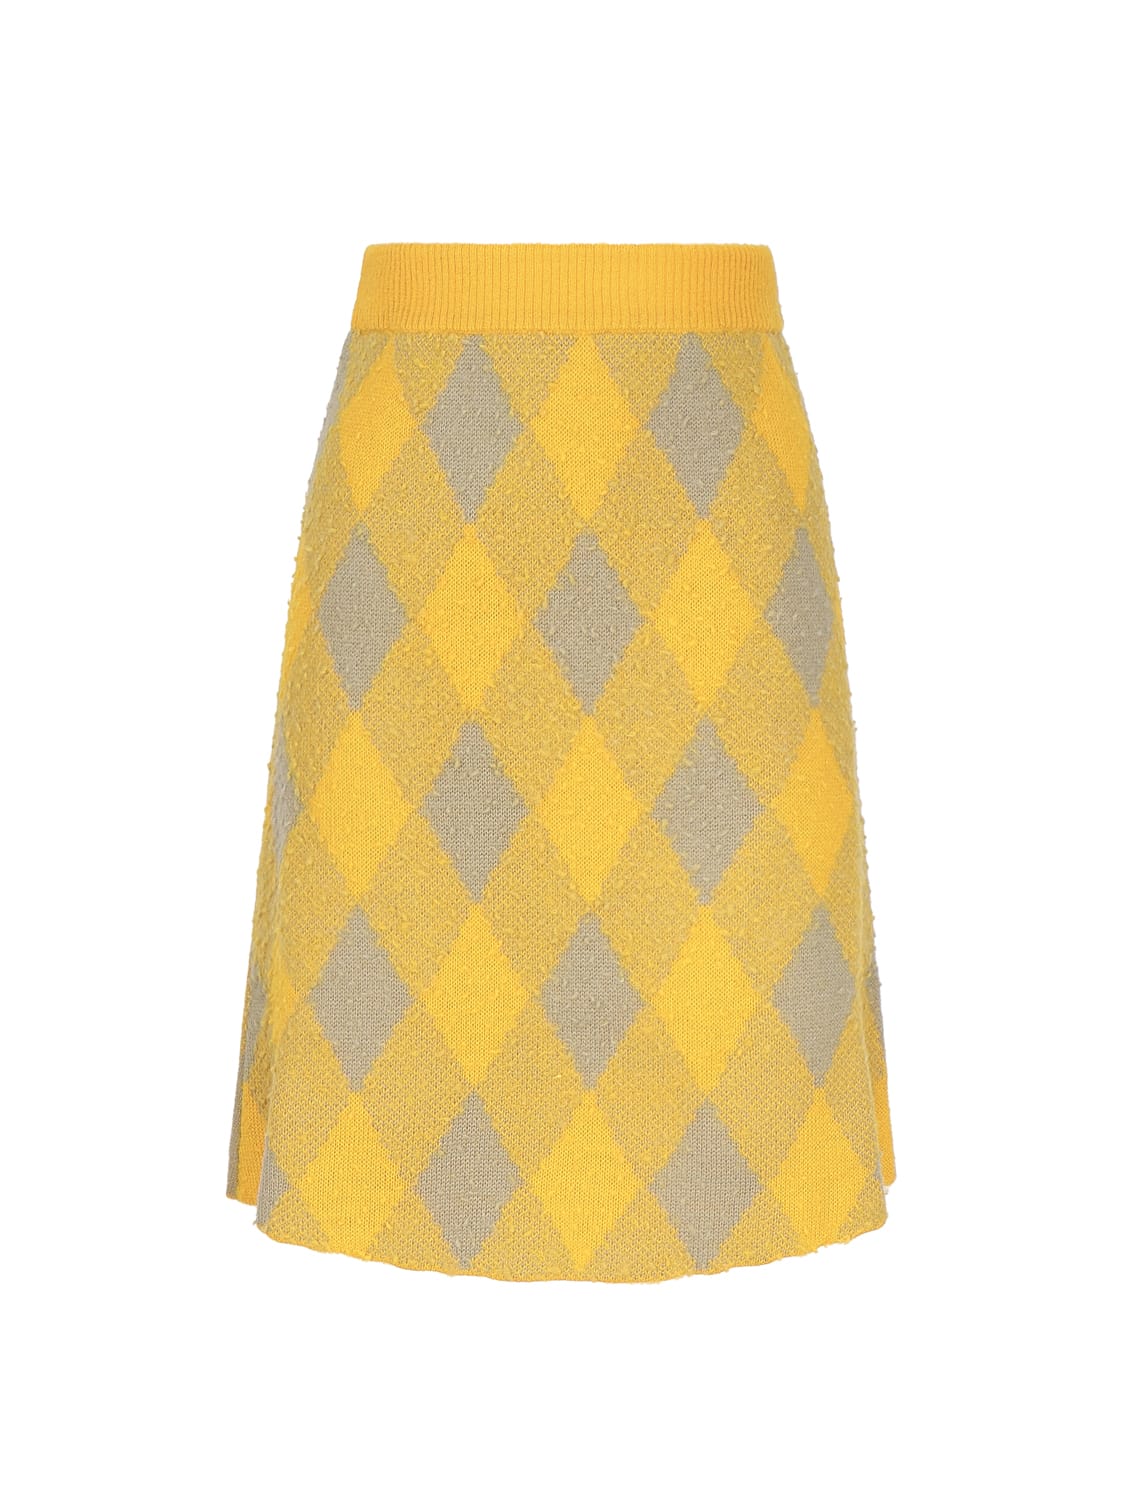 BURBERRY WOOL SKIRT WITH ARGYLE PATTERN